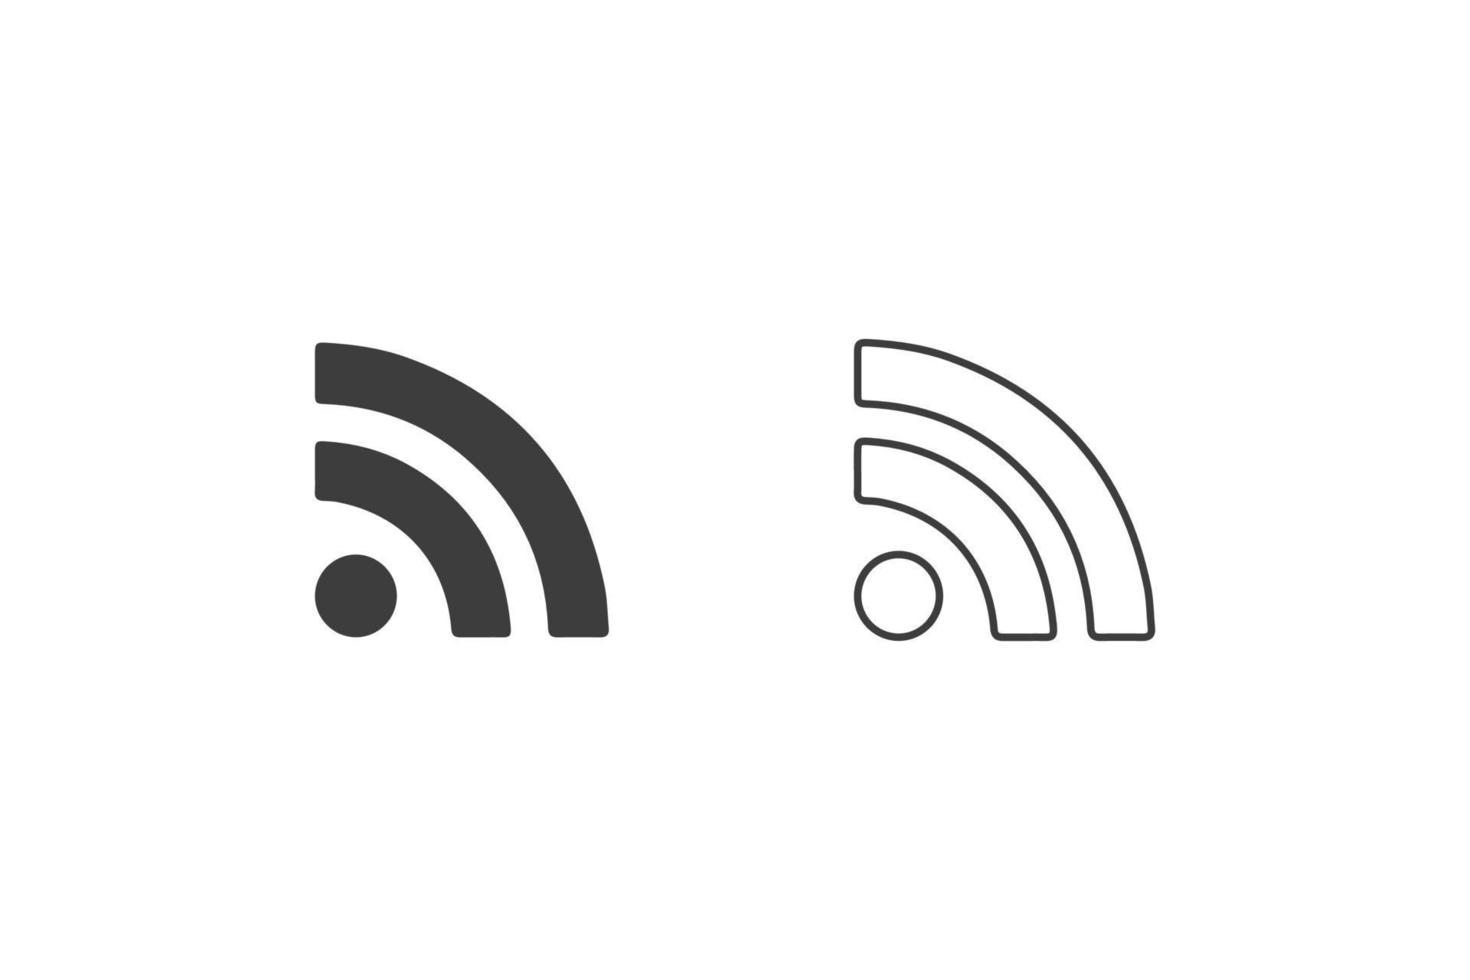 Wifi icons flat design or Wifi icons. 2 style of wifi icons isolated on white background. Wifi on mobile. vector